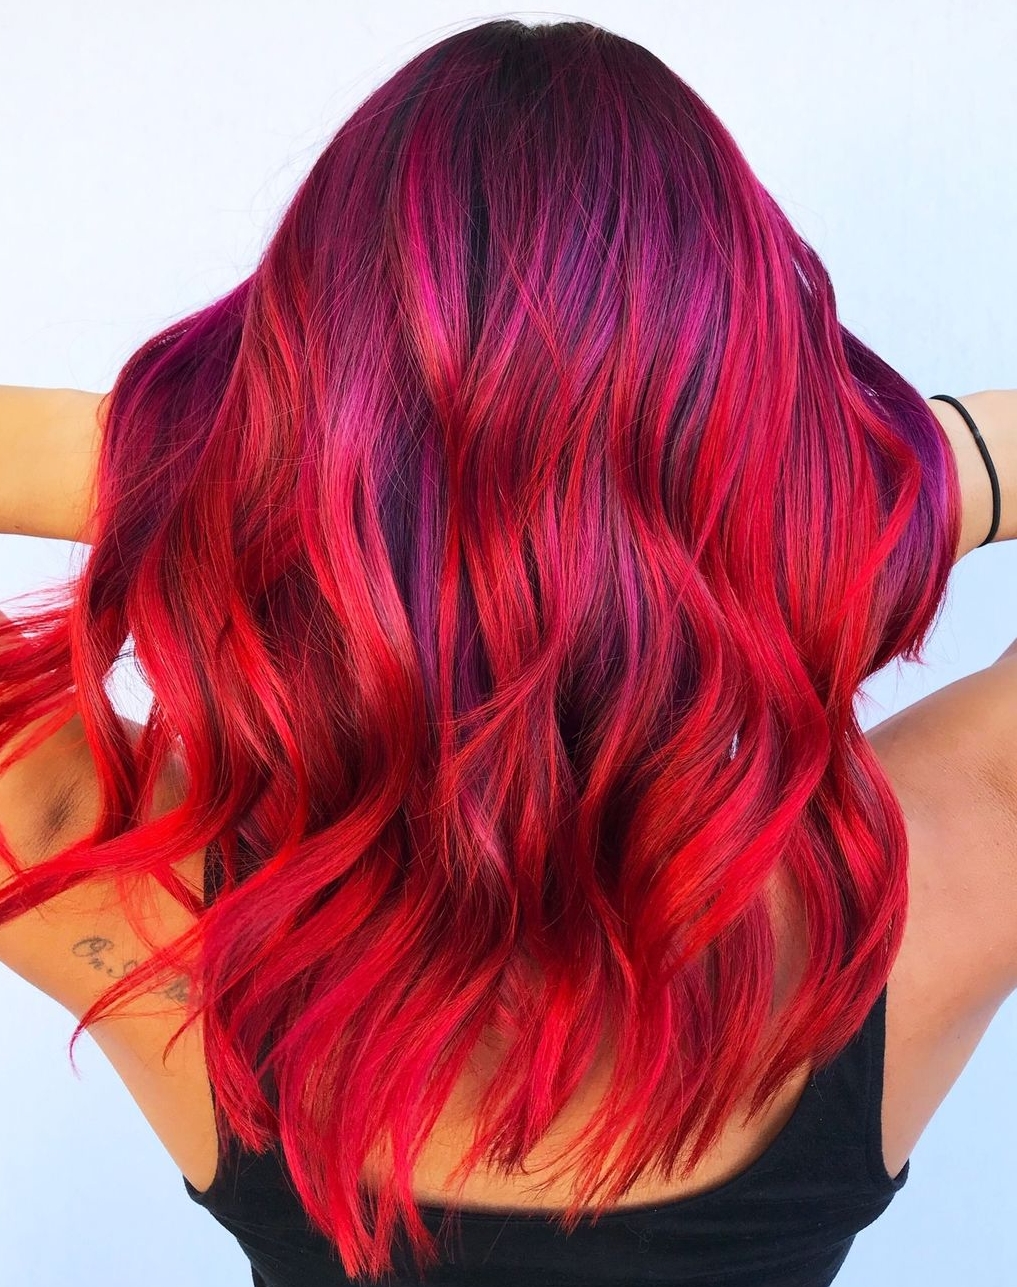 Medium Length Red and Purple Hair Color